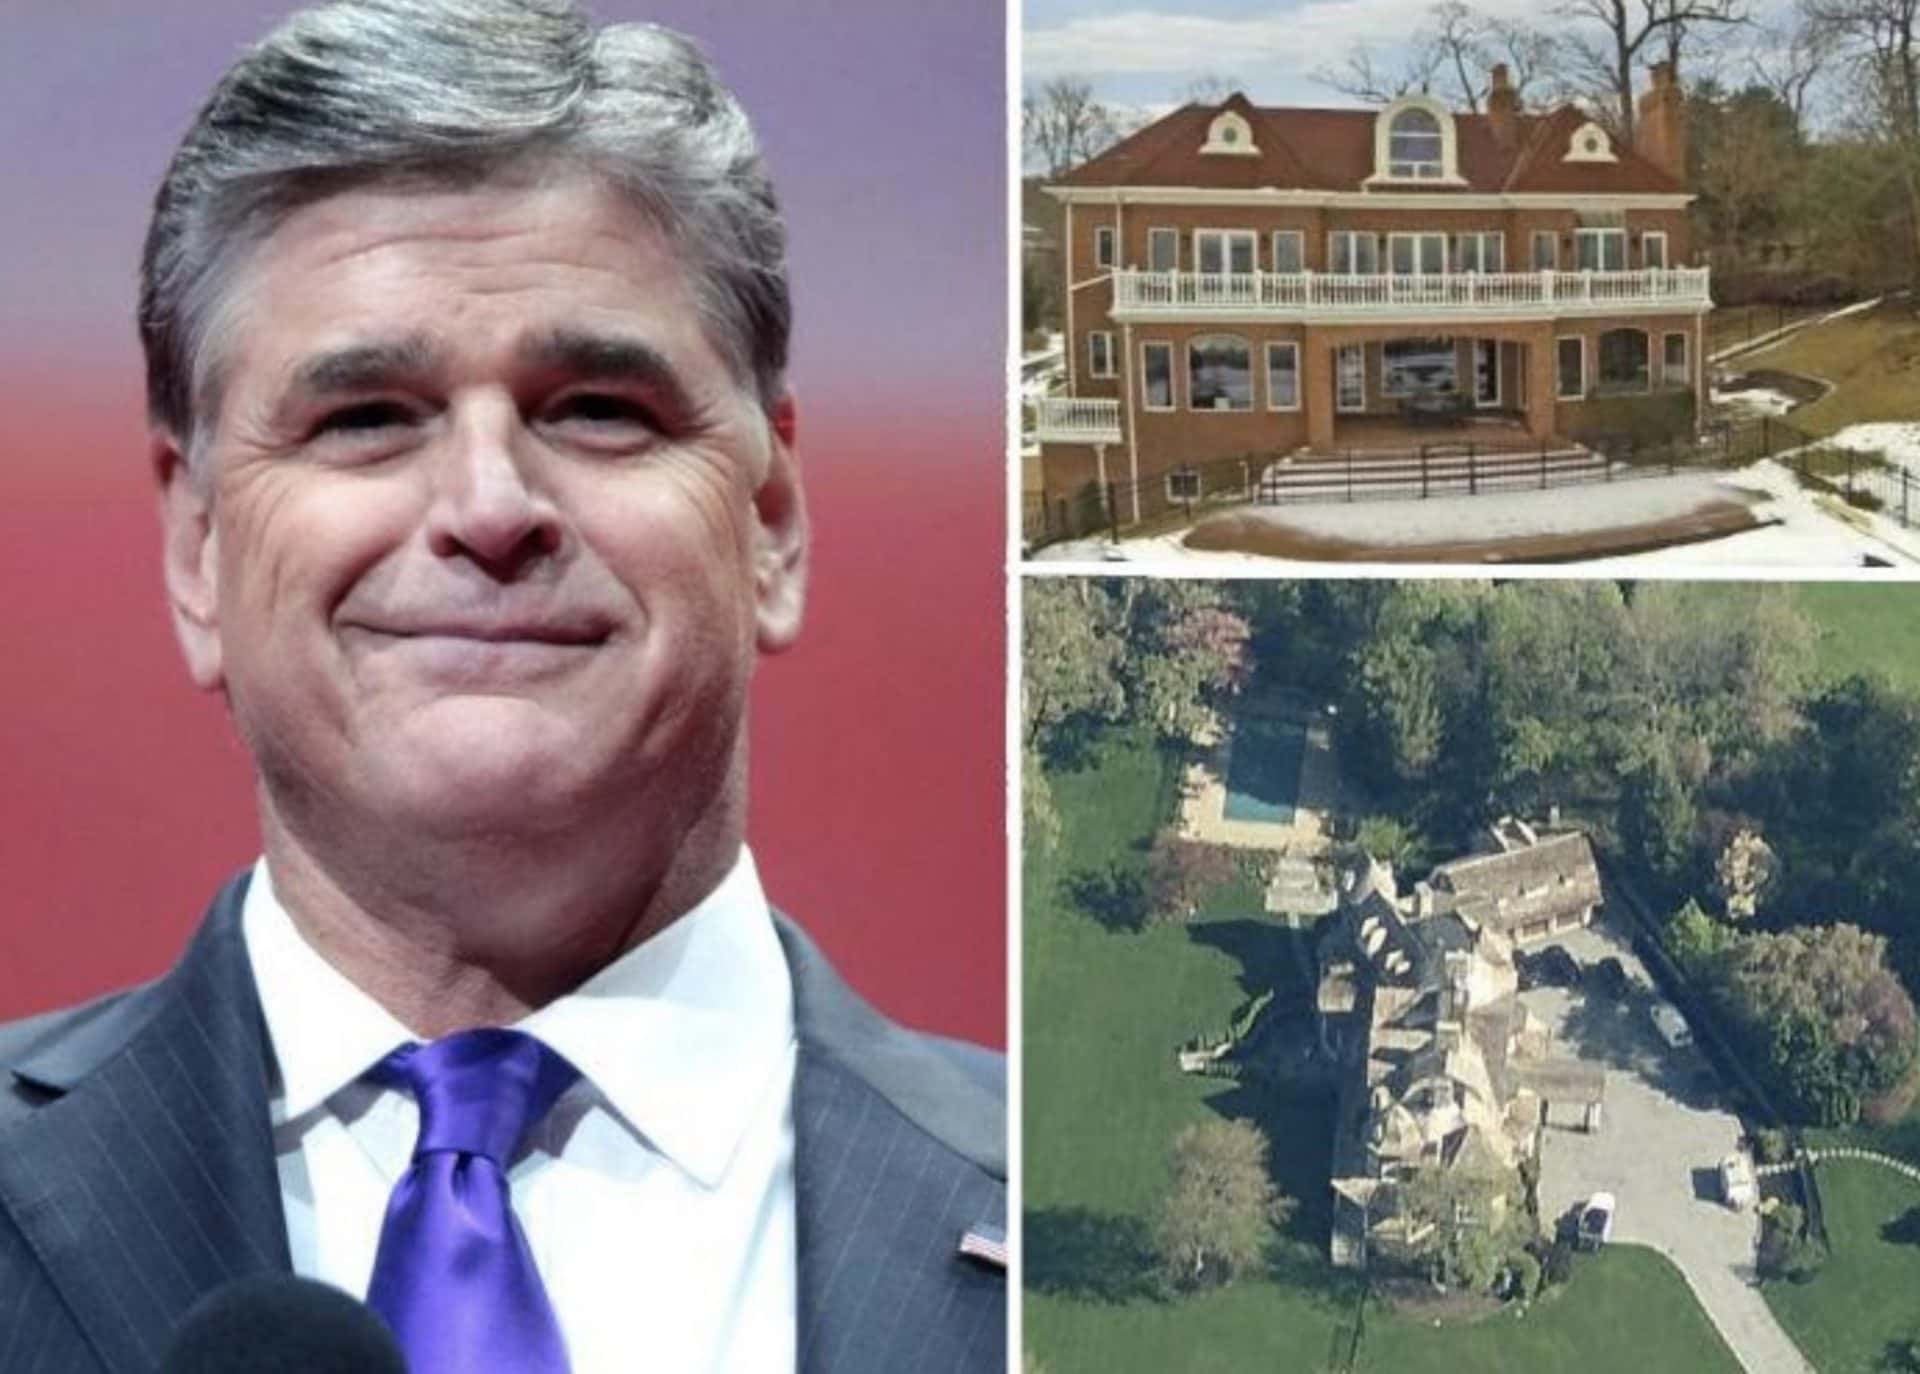 Sean Hannity’s Home In New York ($8.5 Million)